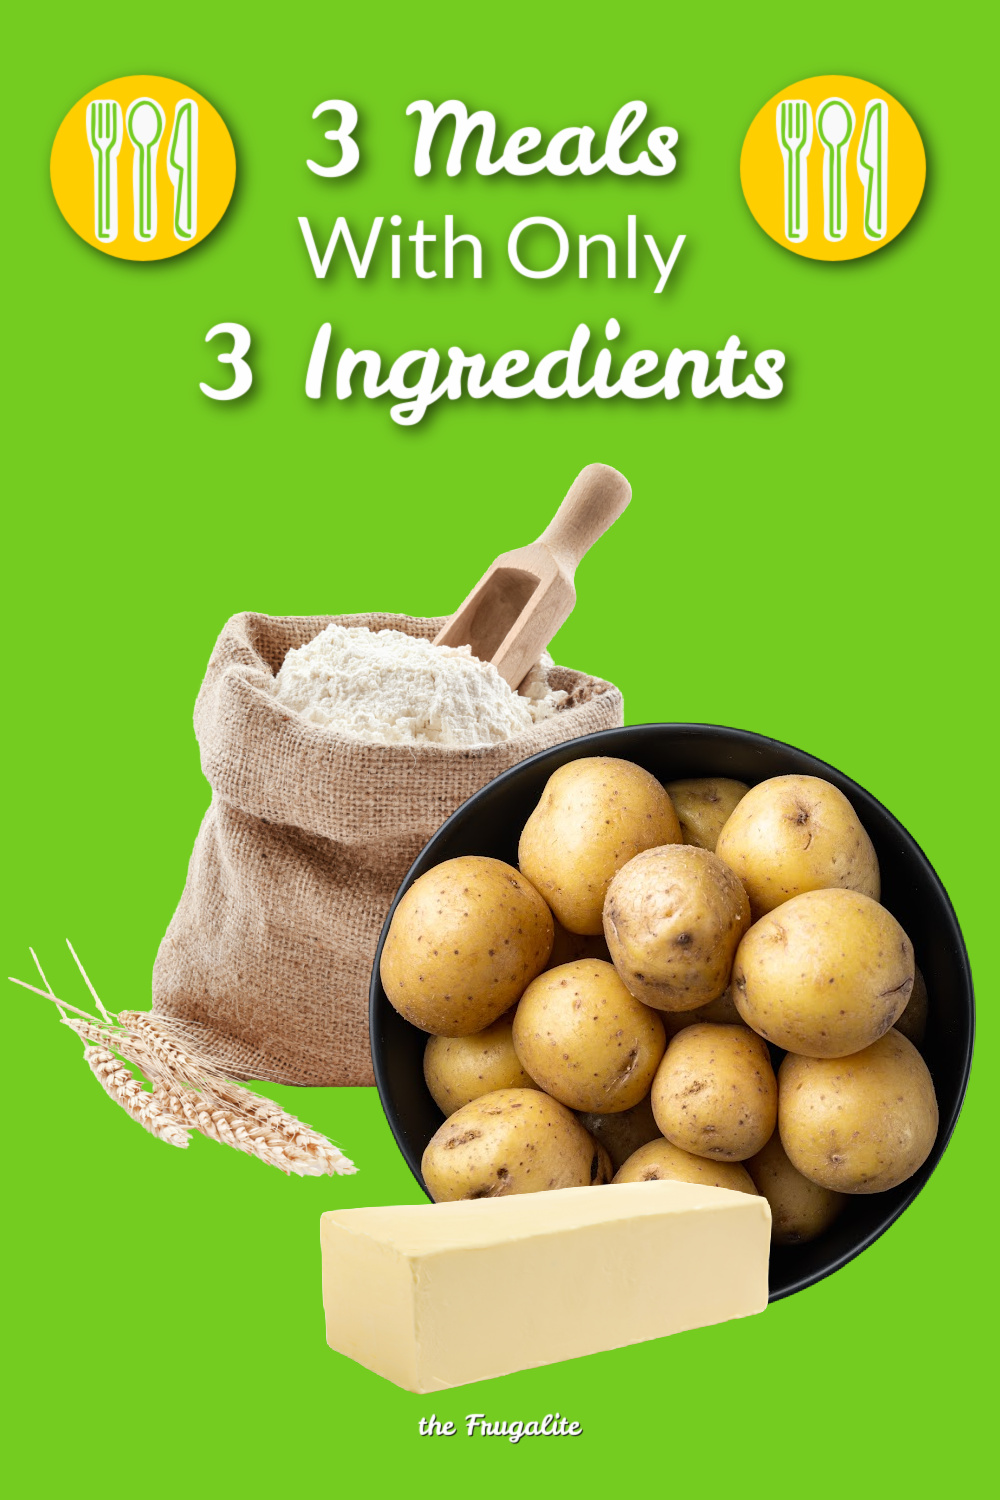 3 Delicious, Thrifty Meals with 3 Ingredients: Potatoes, Flour, and Butter